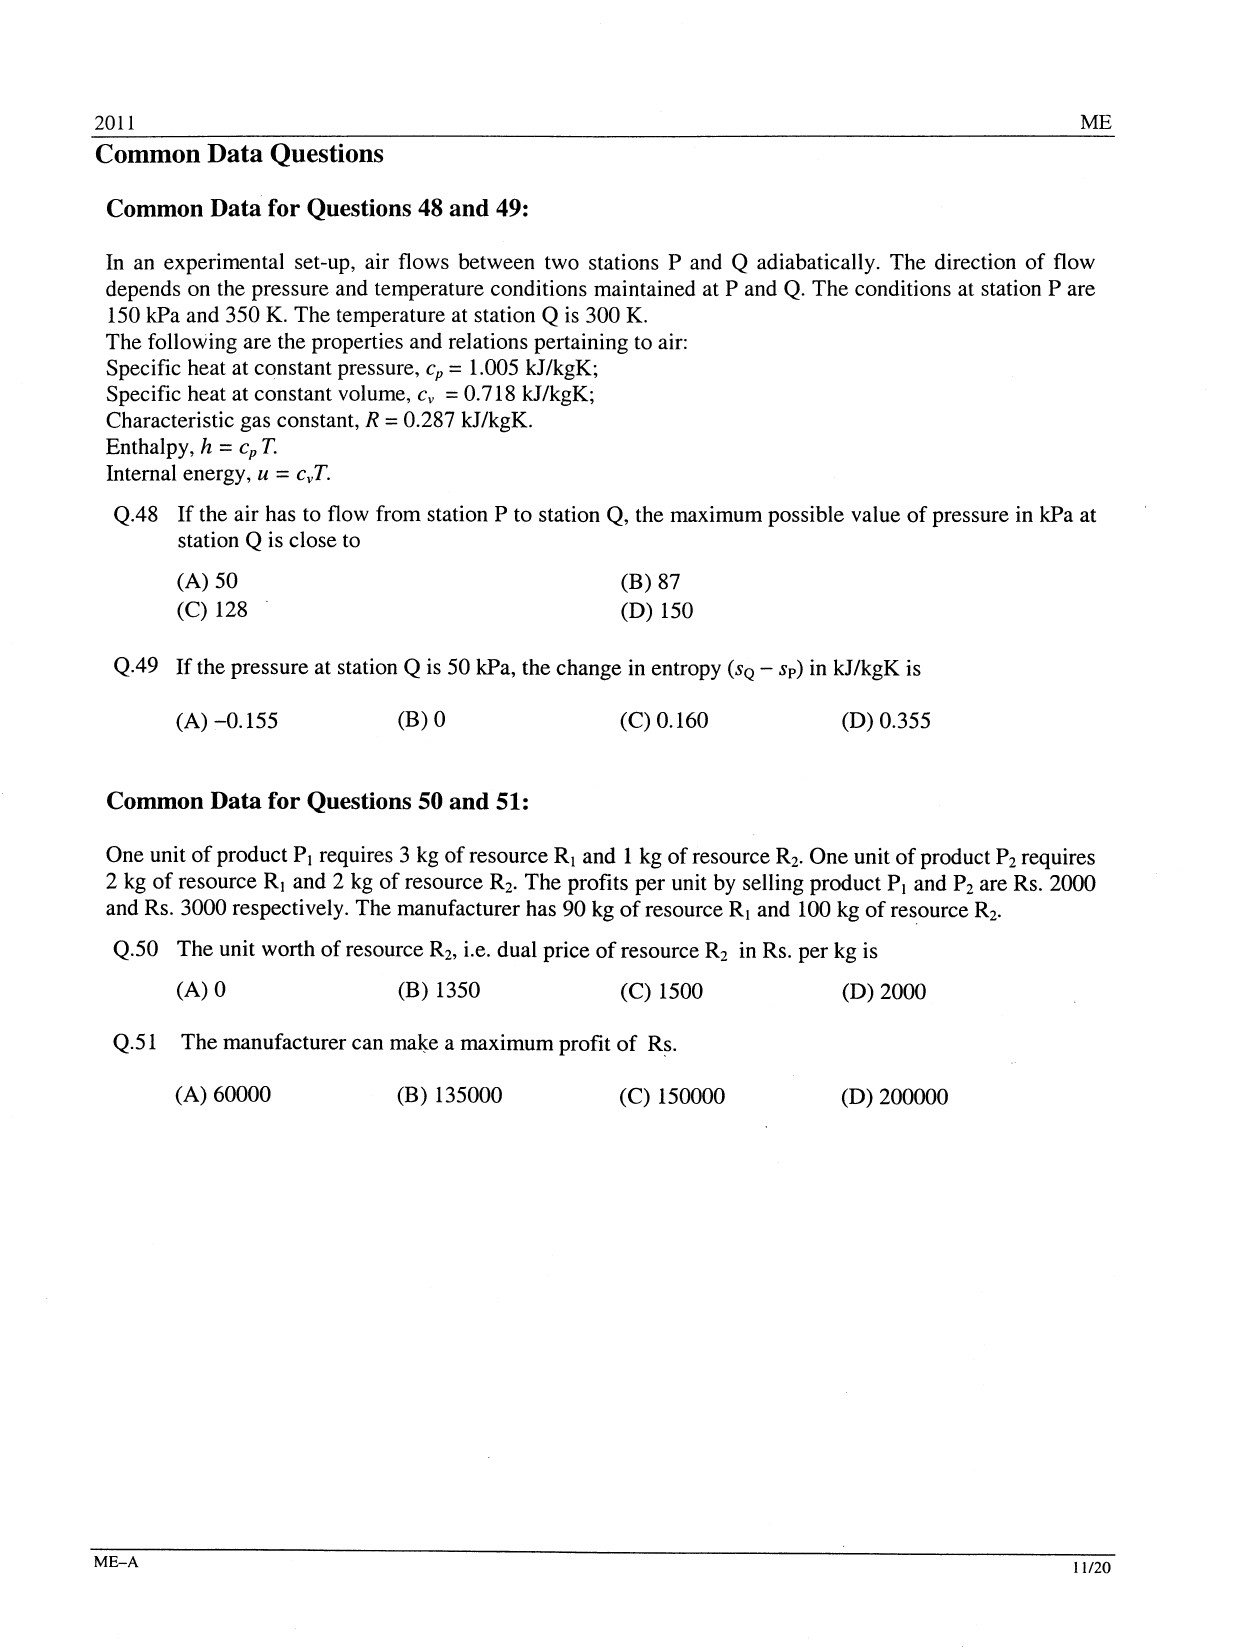 GATE Exam Question Paper 2011 Mechanical Engineering 11